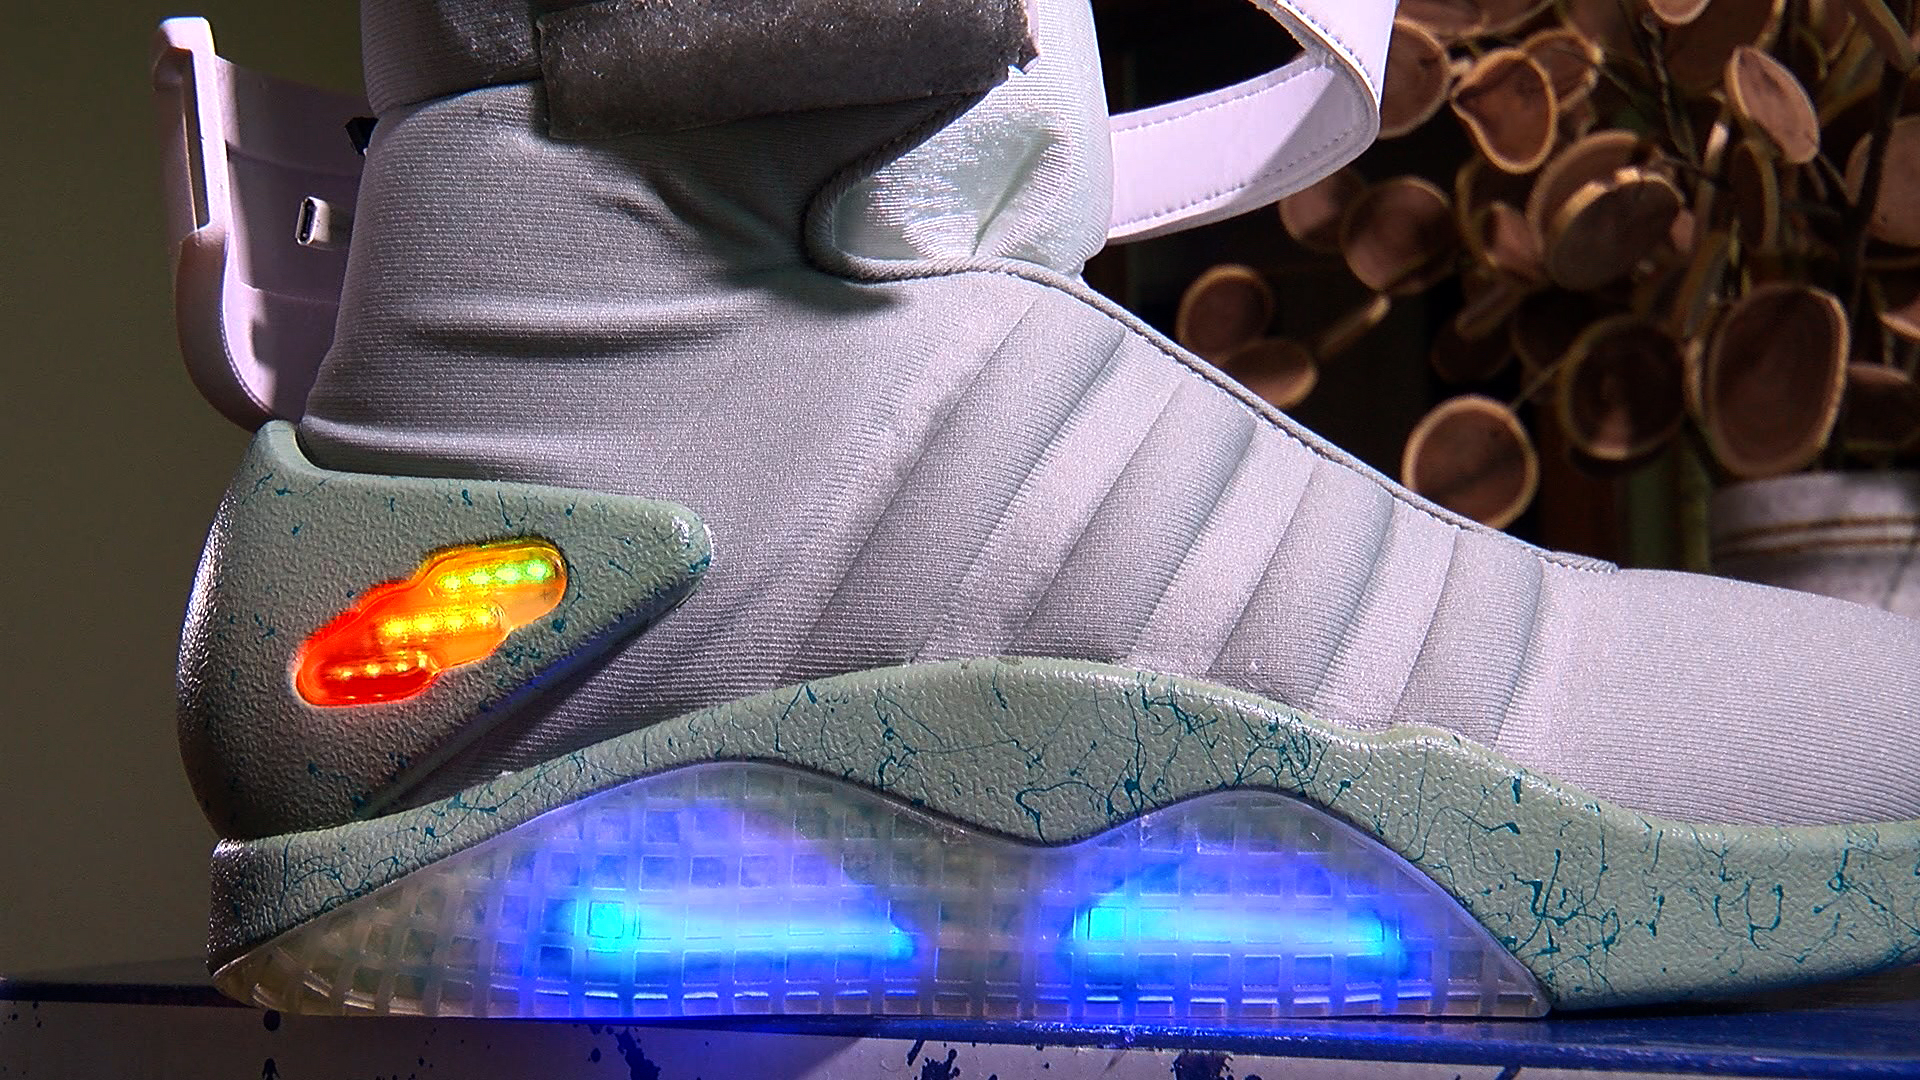 back to the future high tops